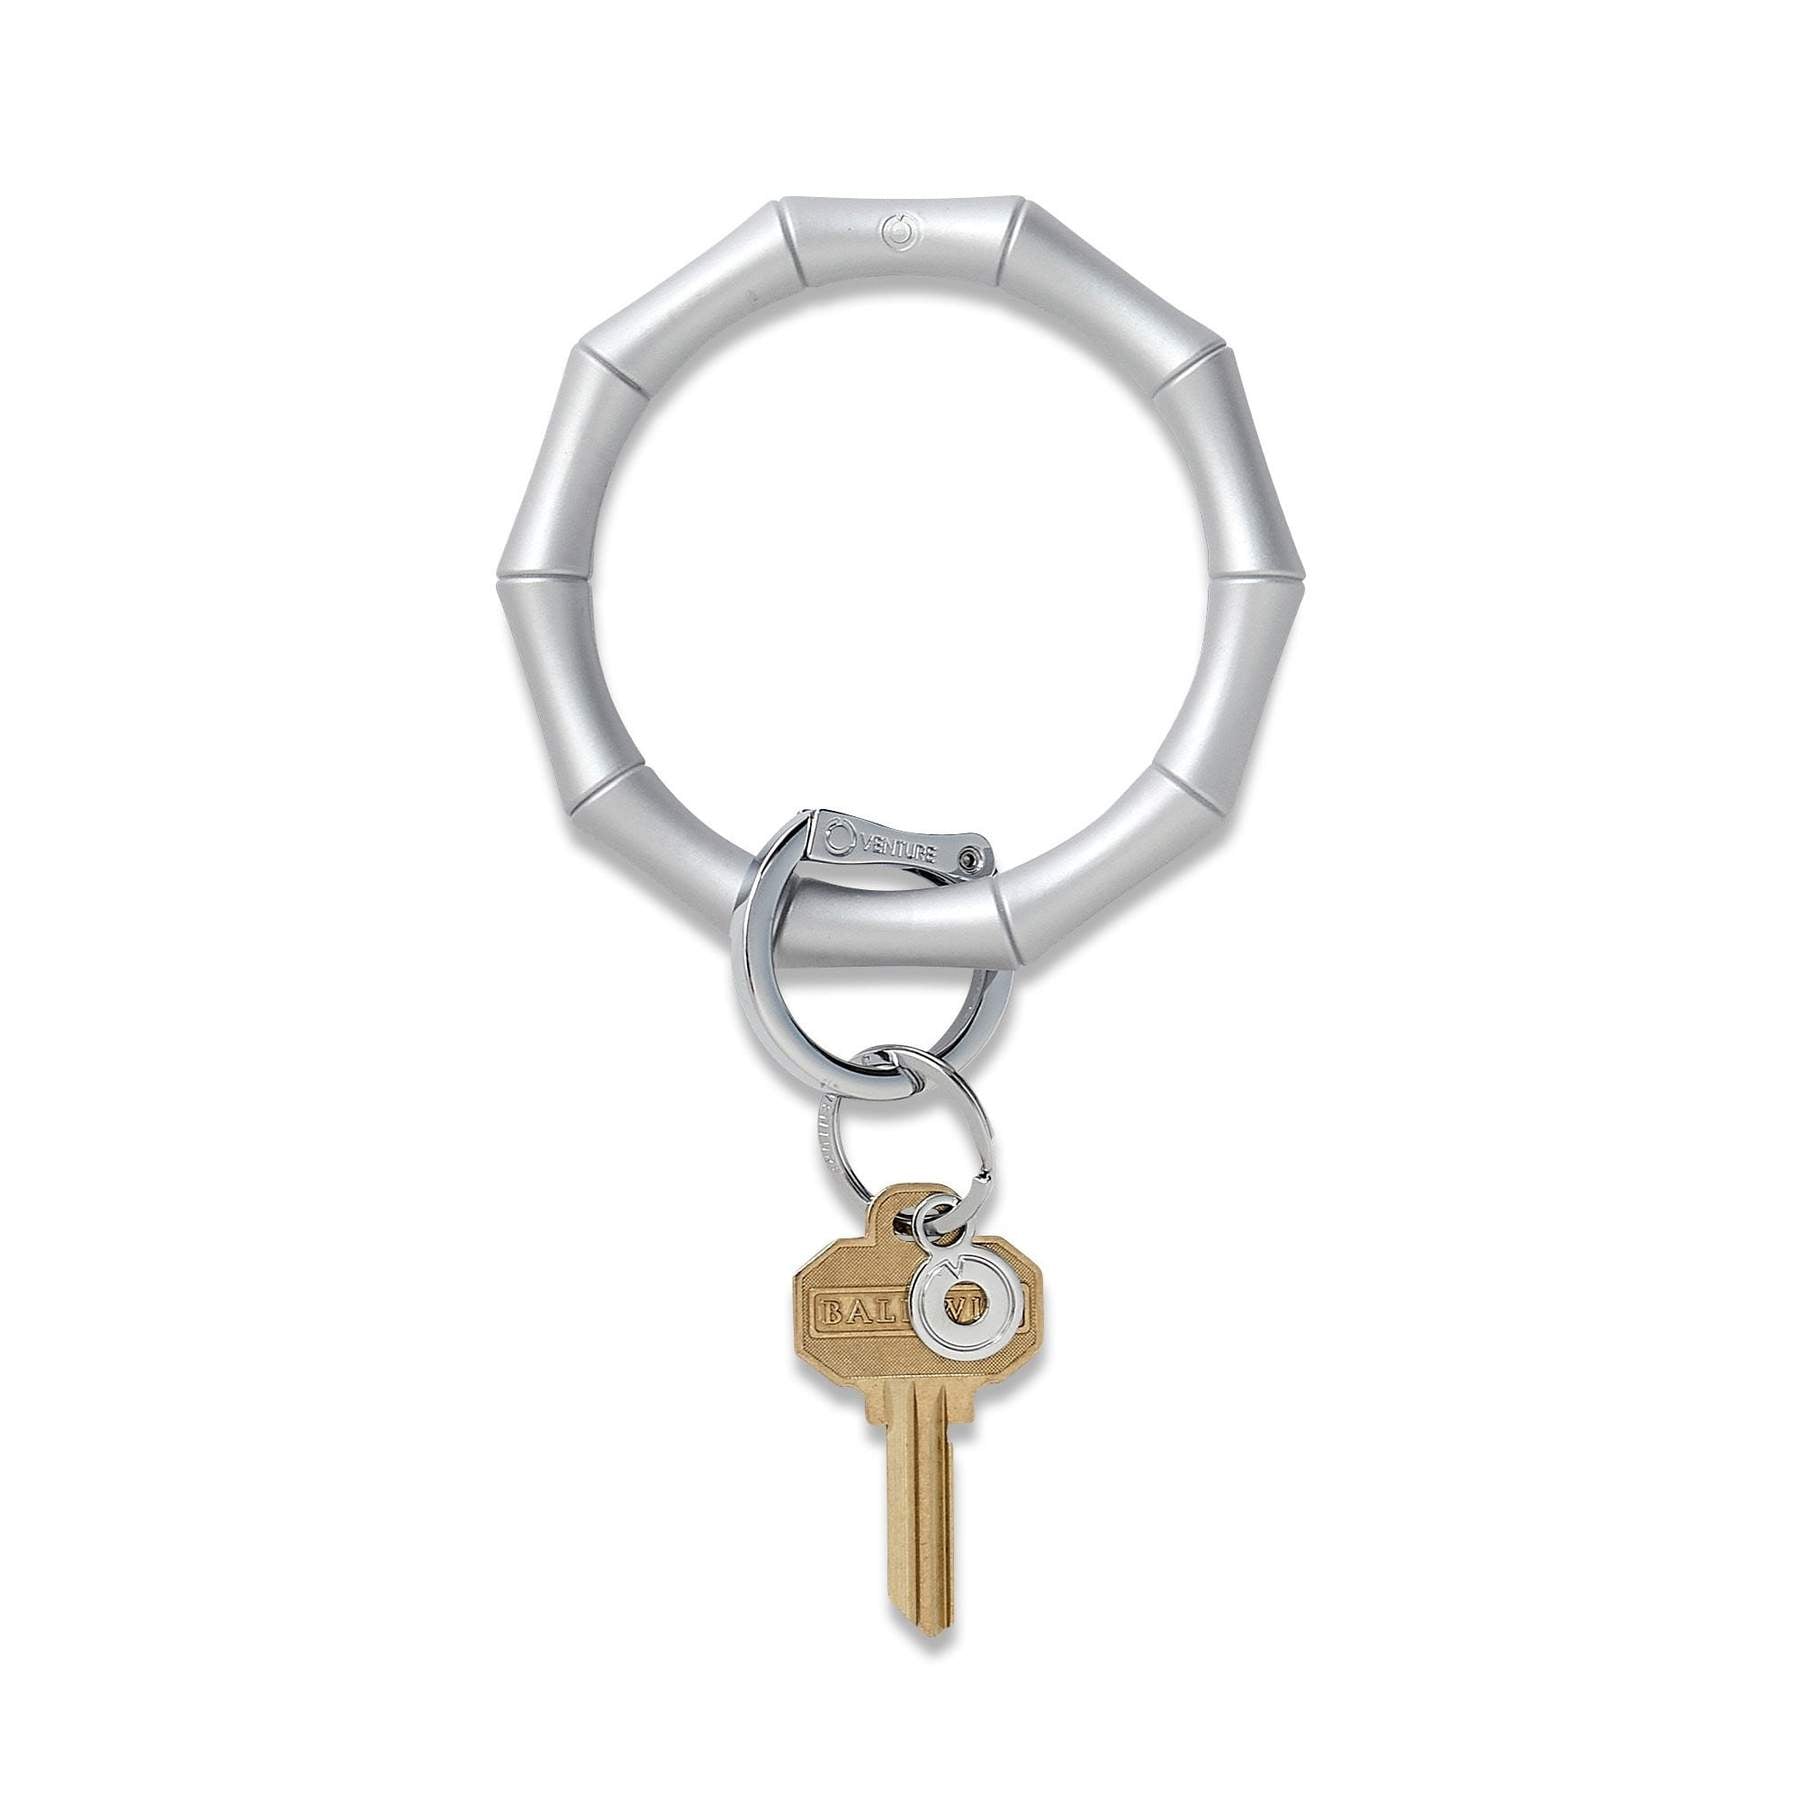 O Venture Bamboo Silicone Key Ring Collection